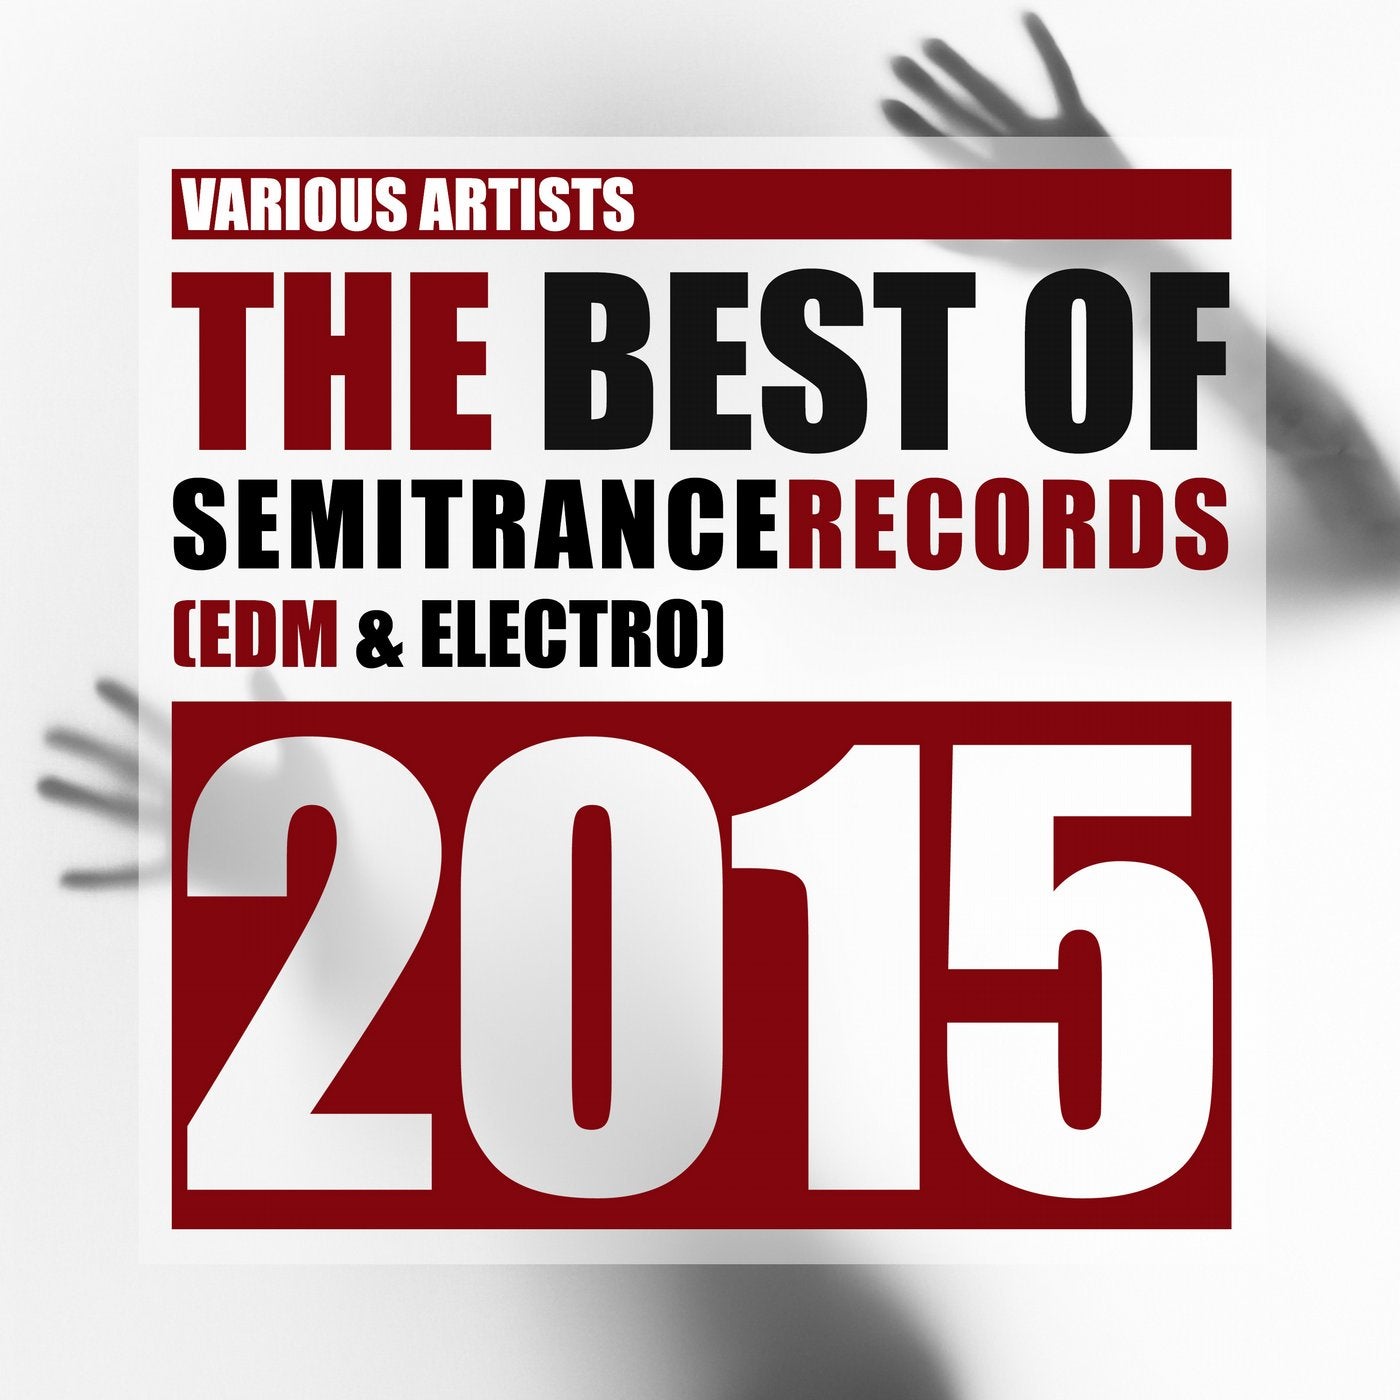 The Best of Semitrance Records 2015 (EDM & Electro)